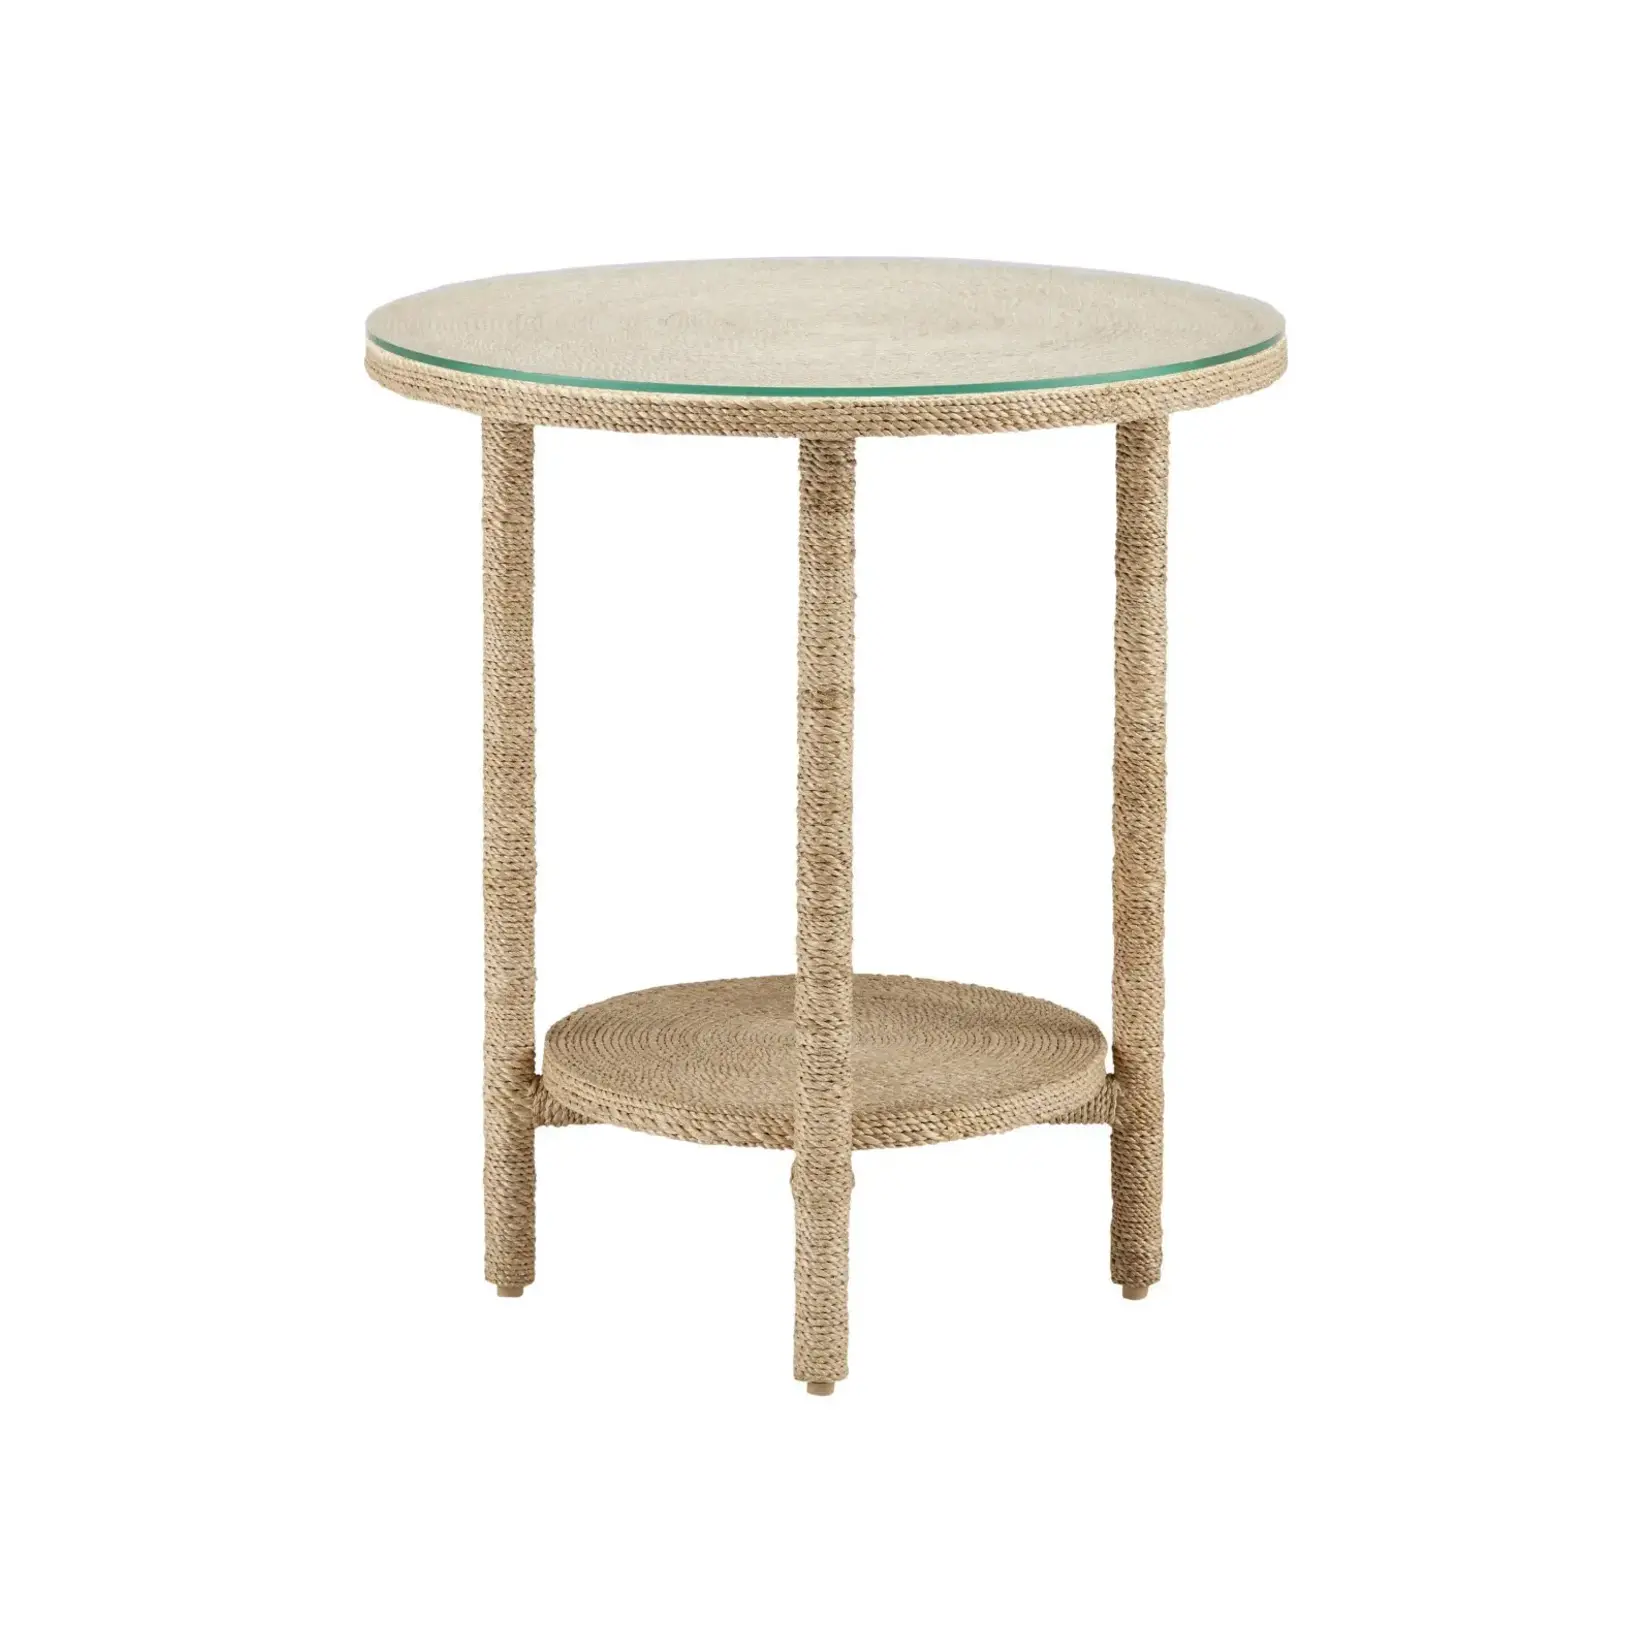 Outside The Box 22x24 Currey & Co Limay Natural Abaca Rope Wrought Iron Accent Table W / Glass